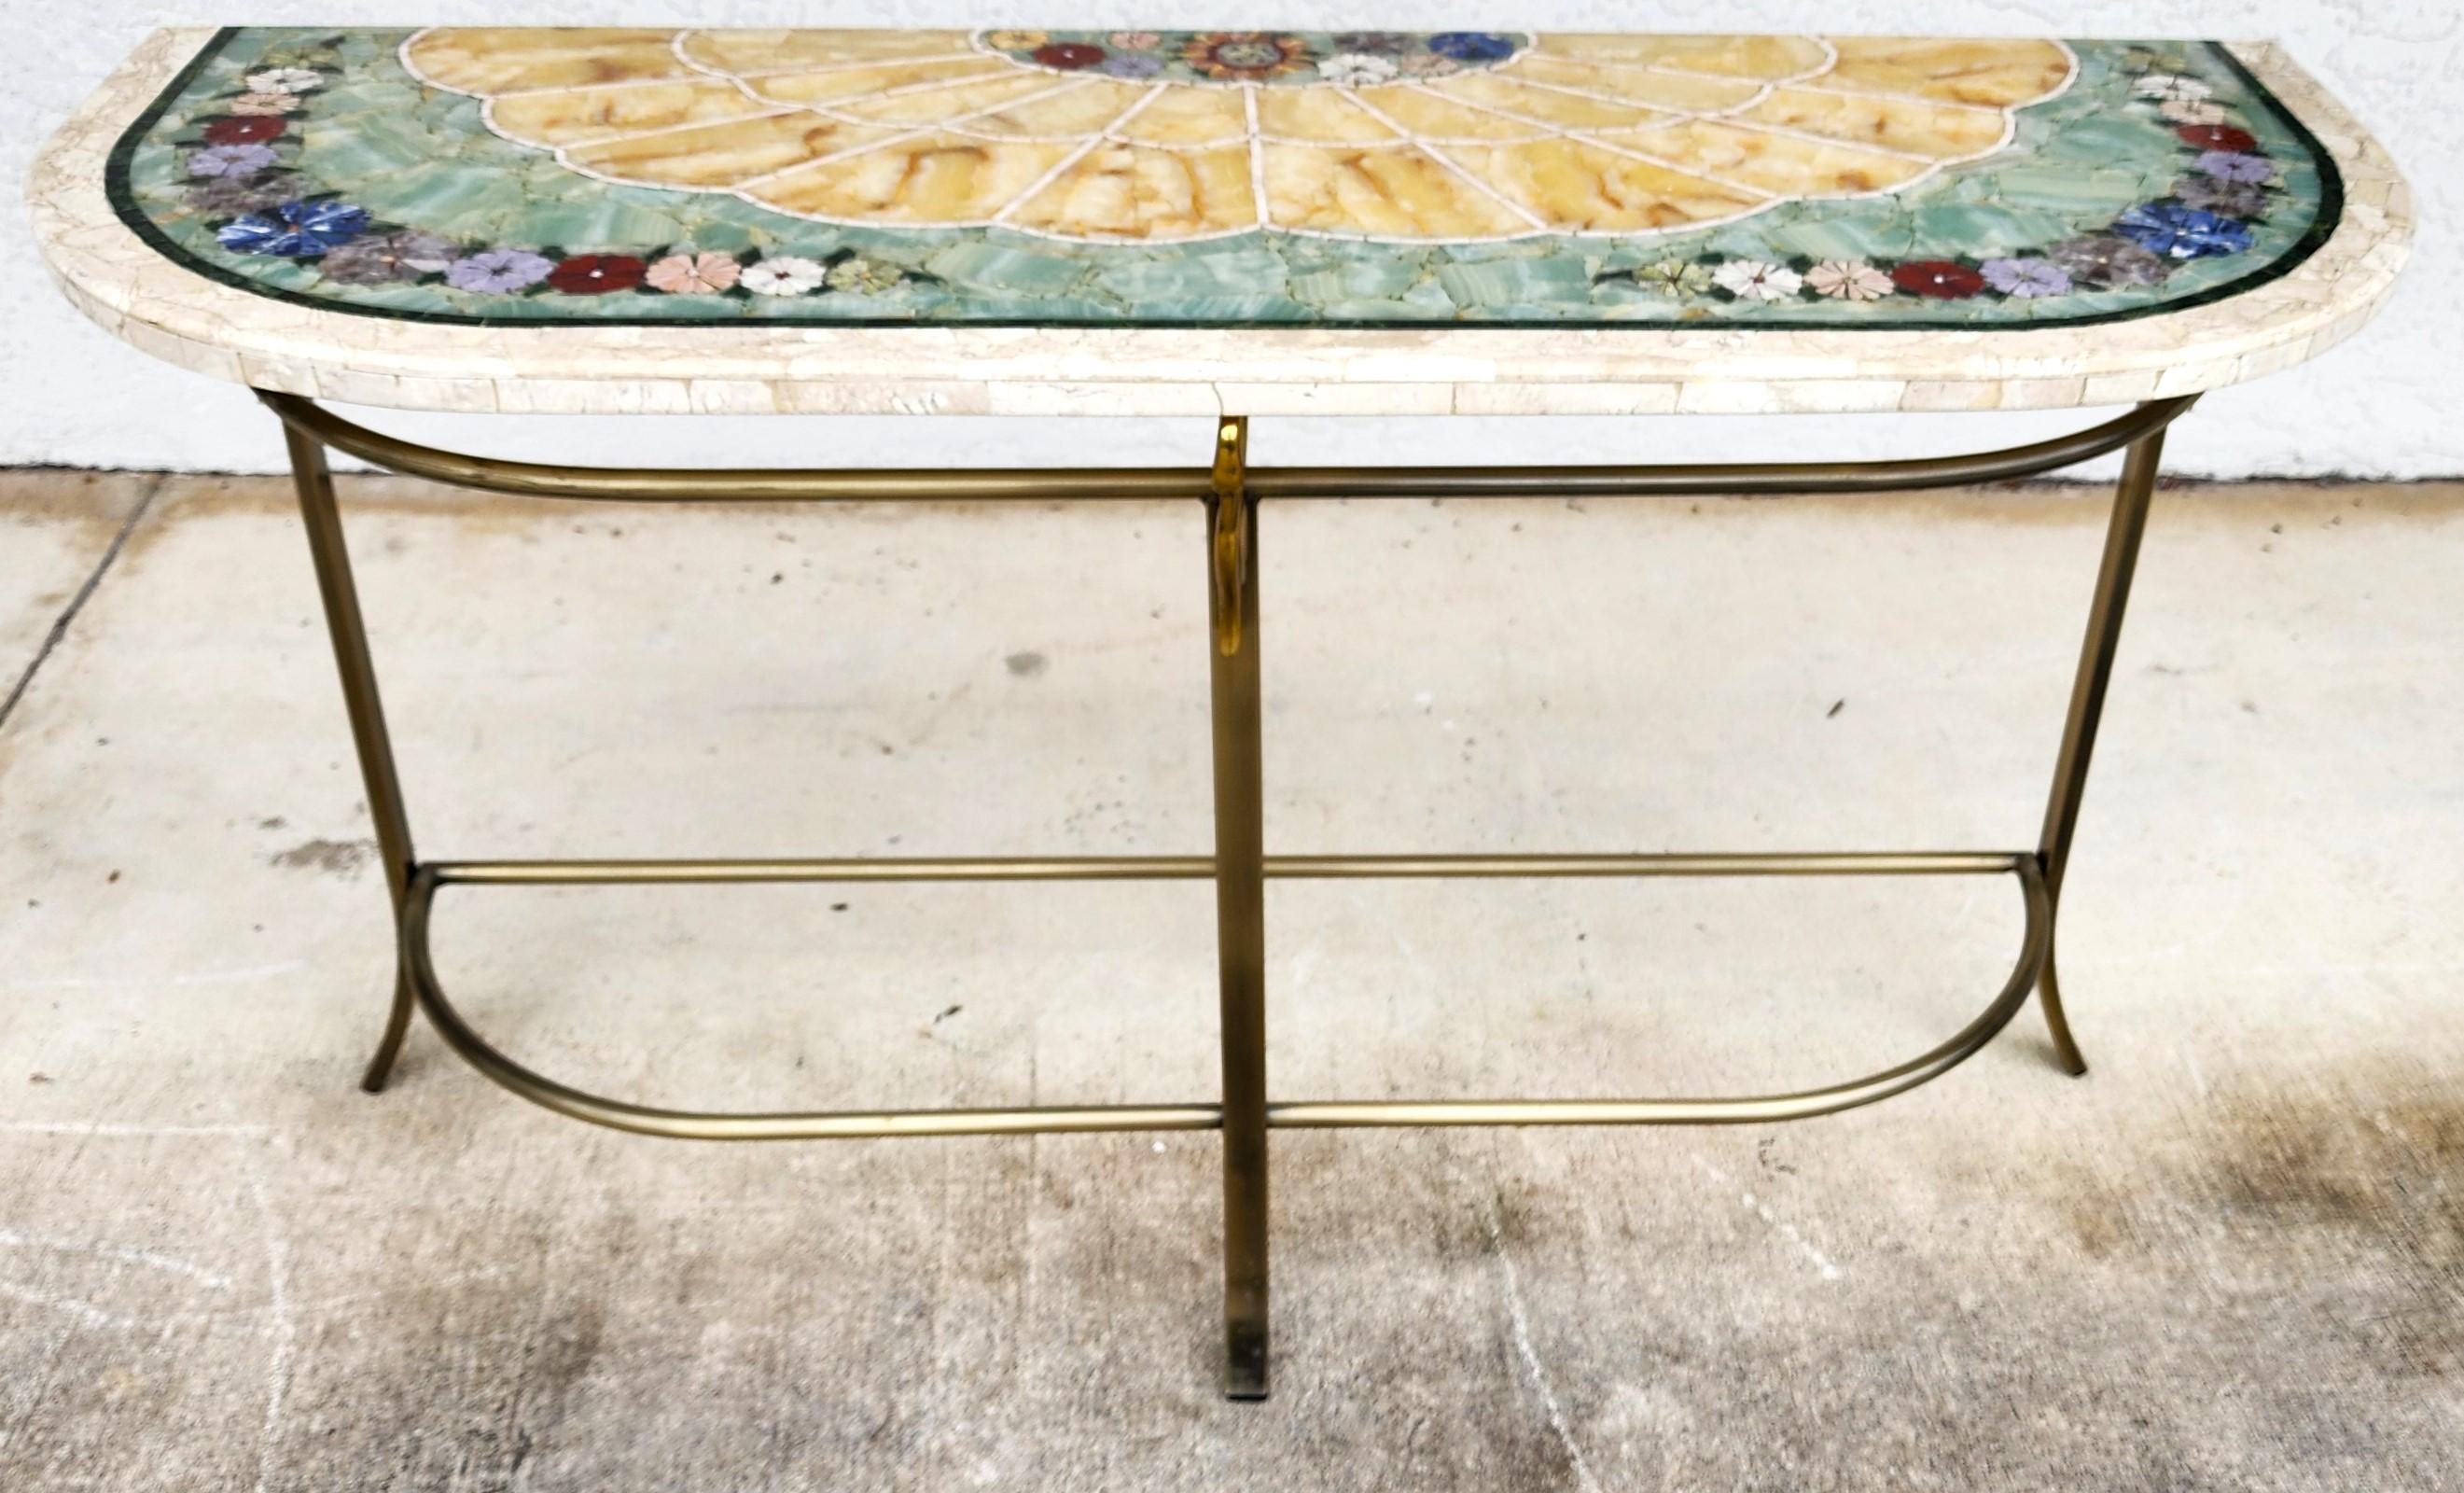 Hand-Crafted Regency Console Table Brass Swans Inlaid Onyx For Sale